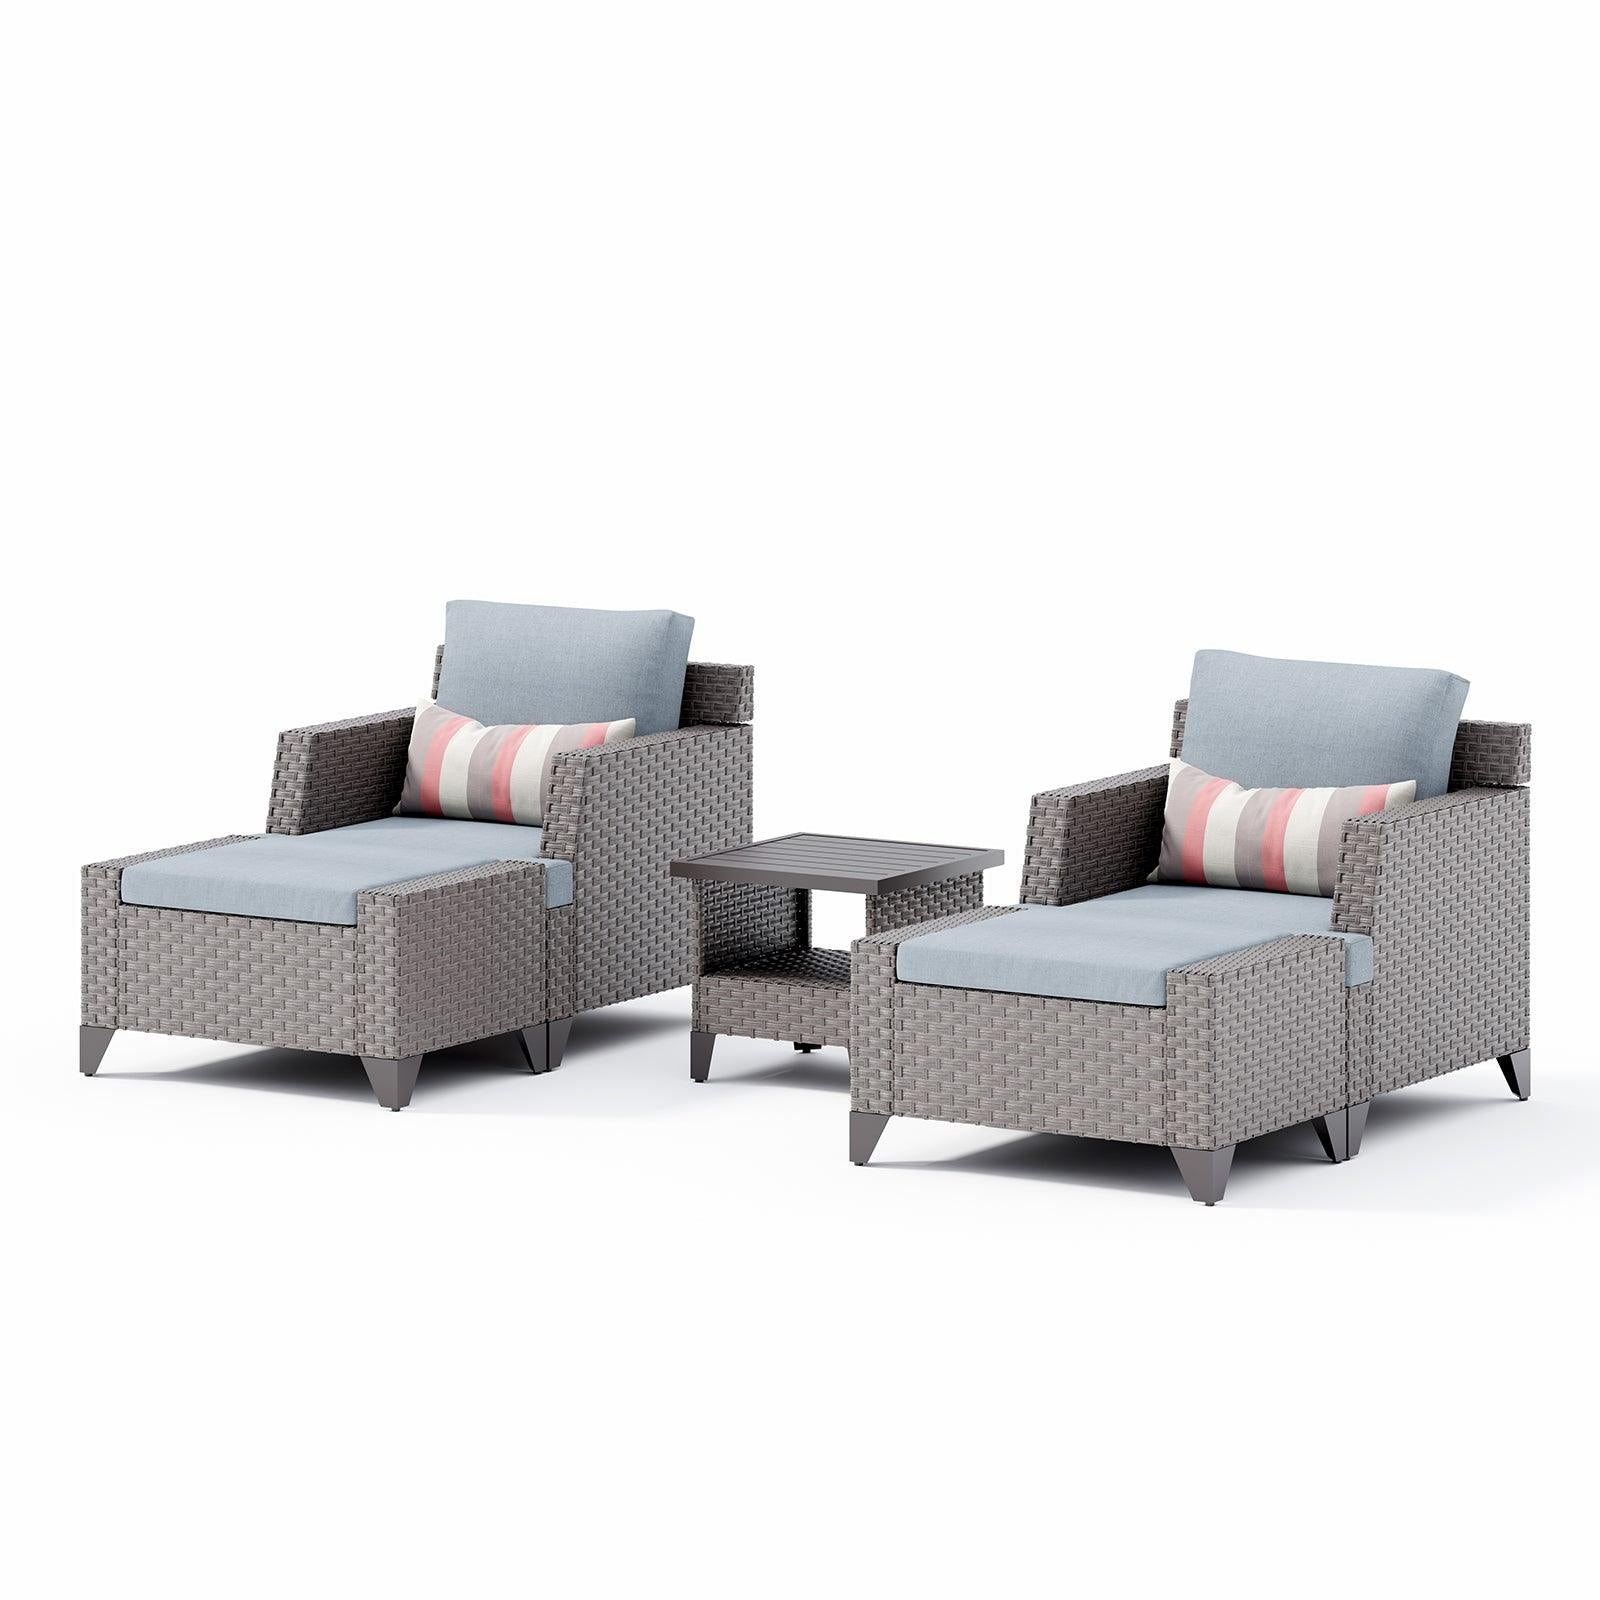 Charleston 5-pc. Outdoor Sectional Set with Ottomans - OrangeCasual